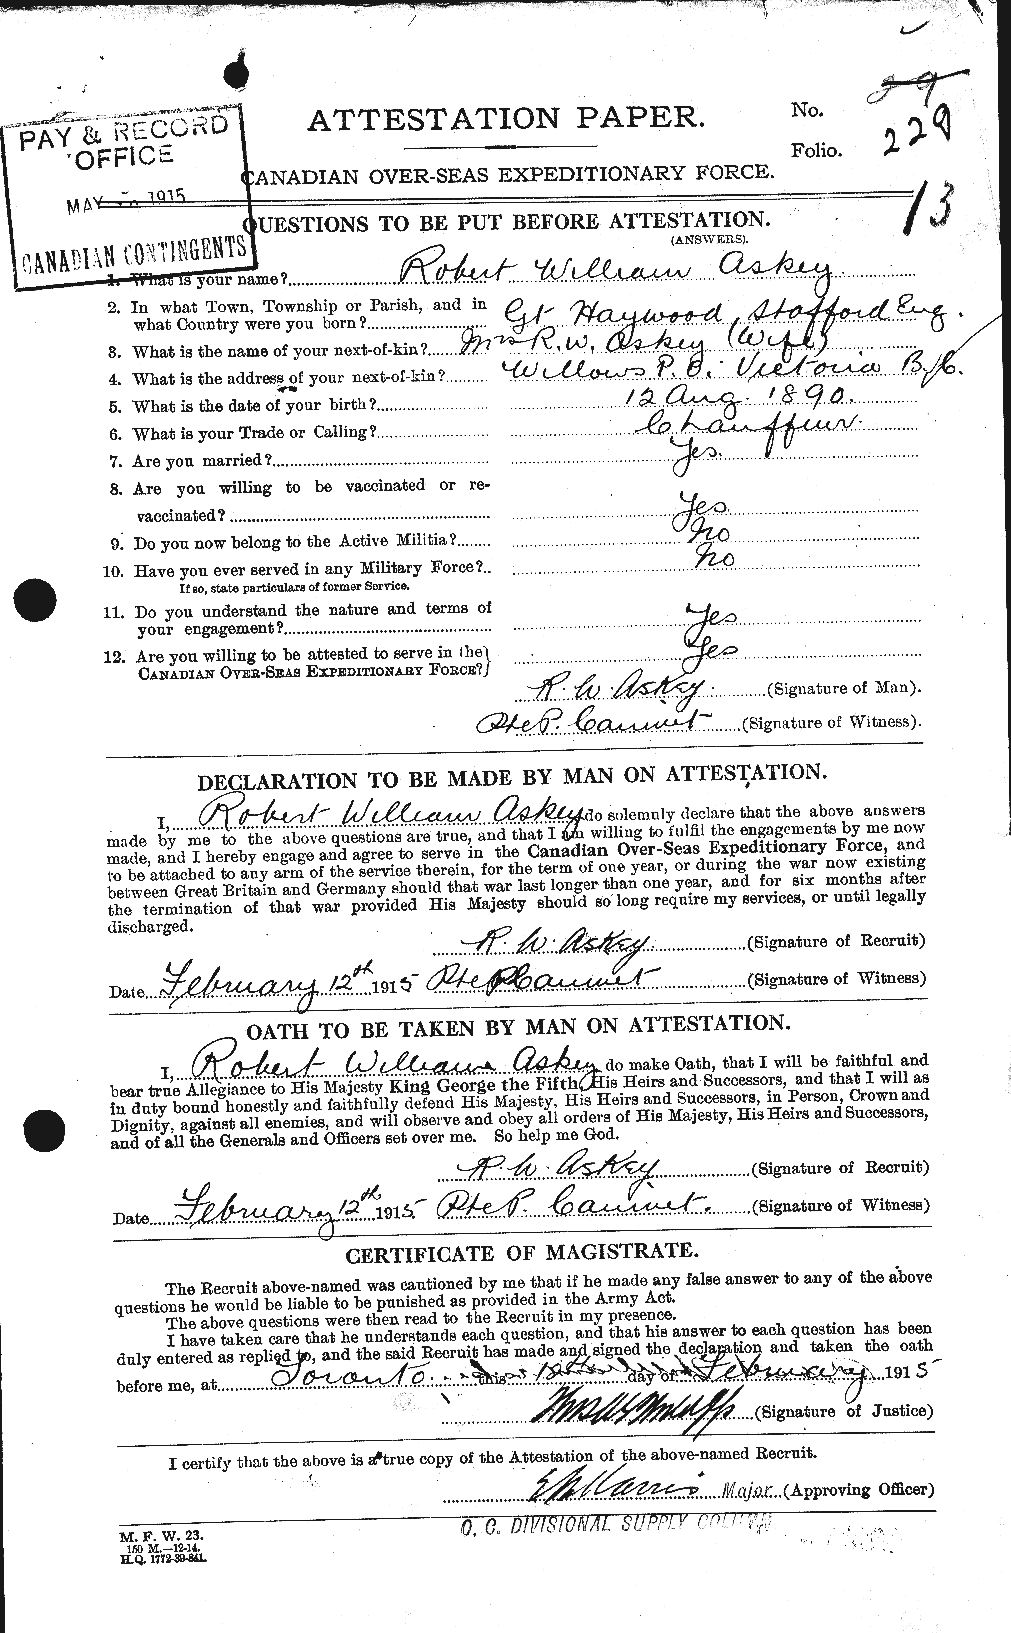 Personnel Records of the First World War - CEF 223657a